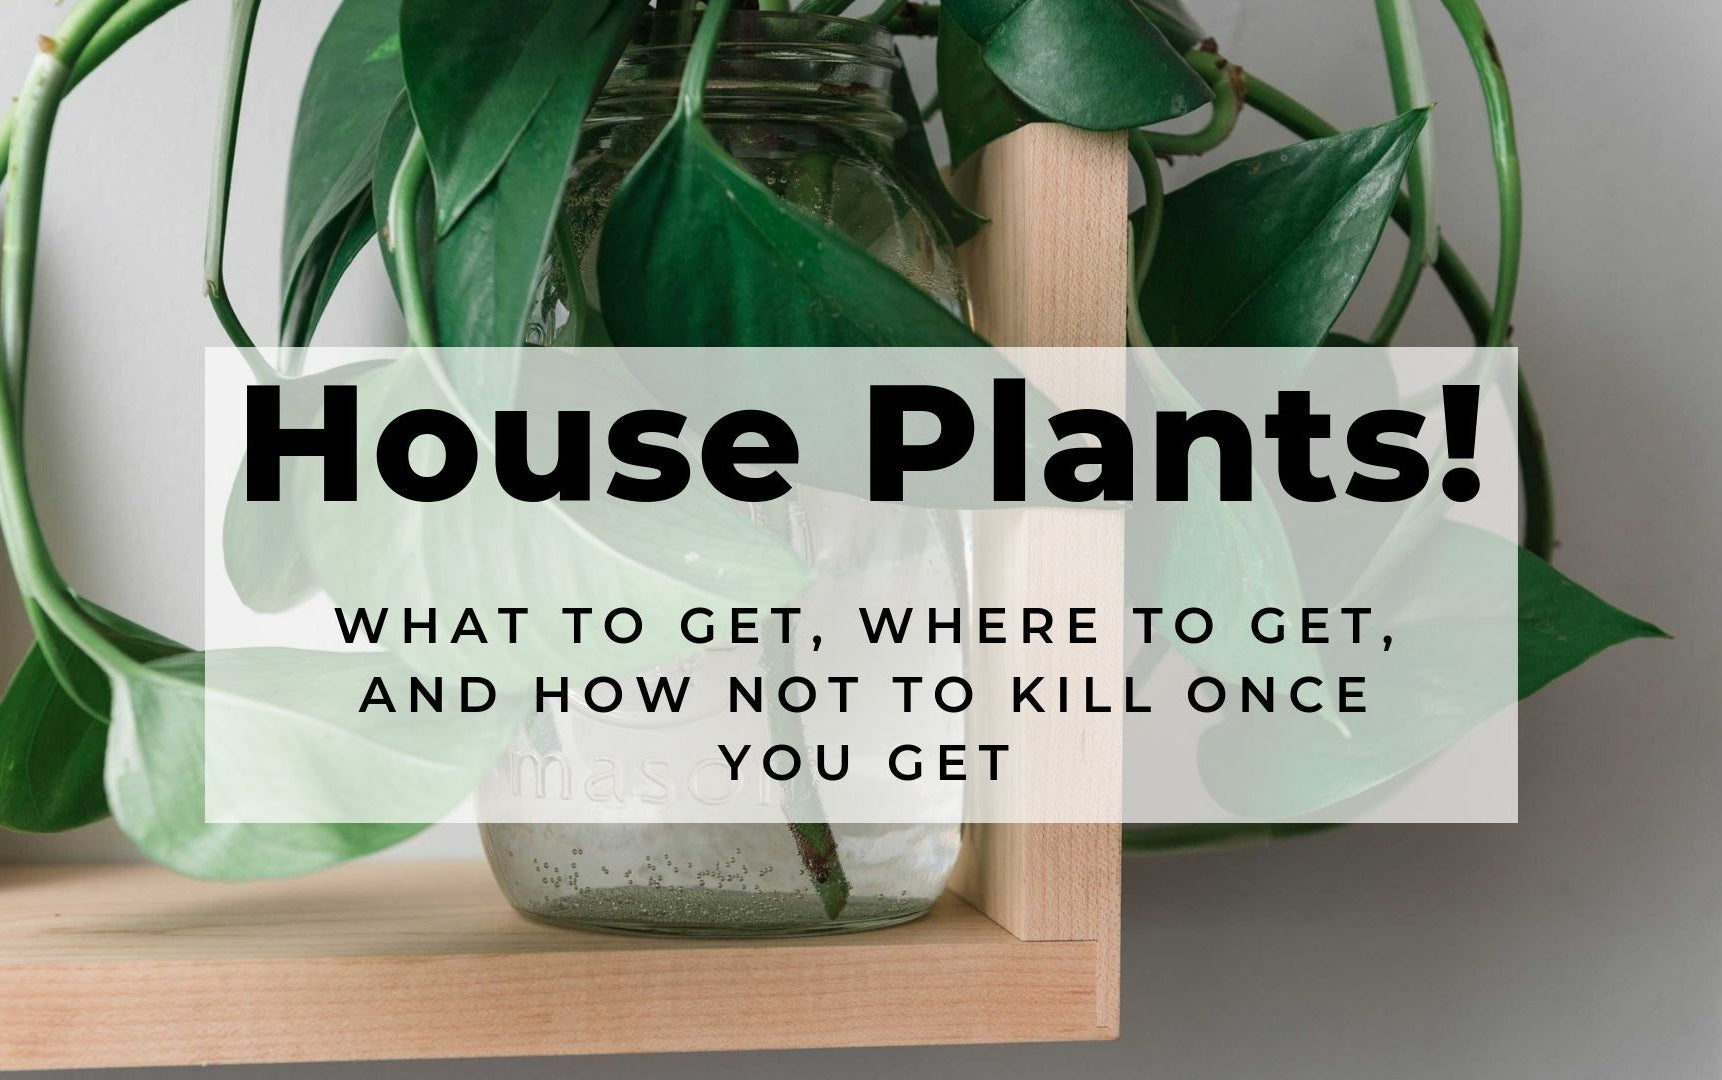 House Plants: The Plants You Want, Where To Find Them, And How To Keep Them Alive